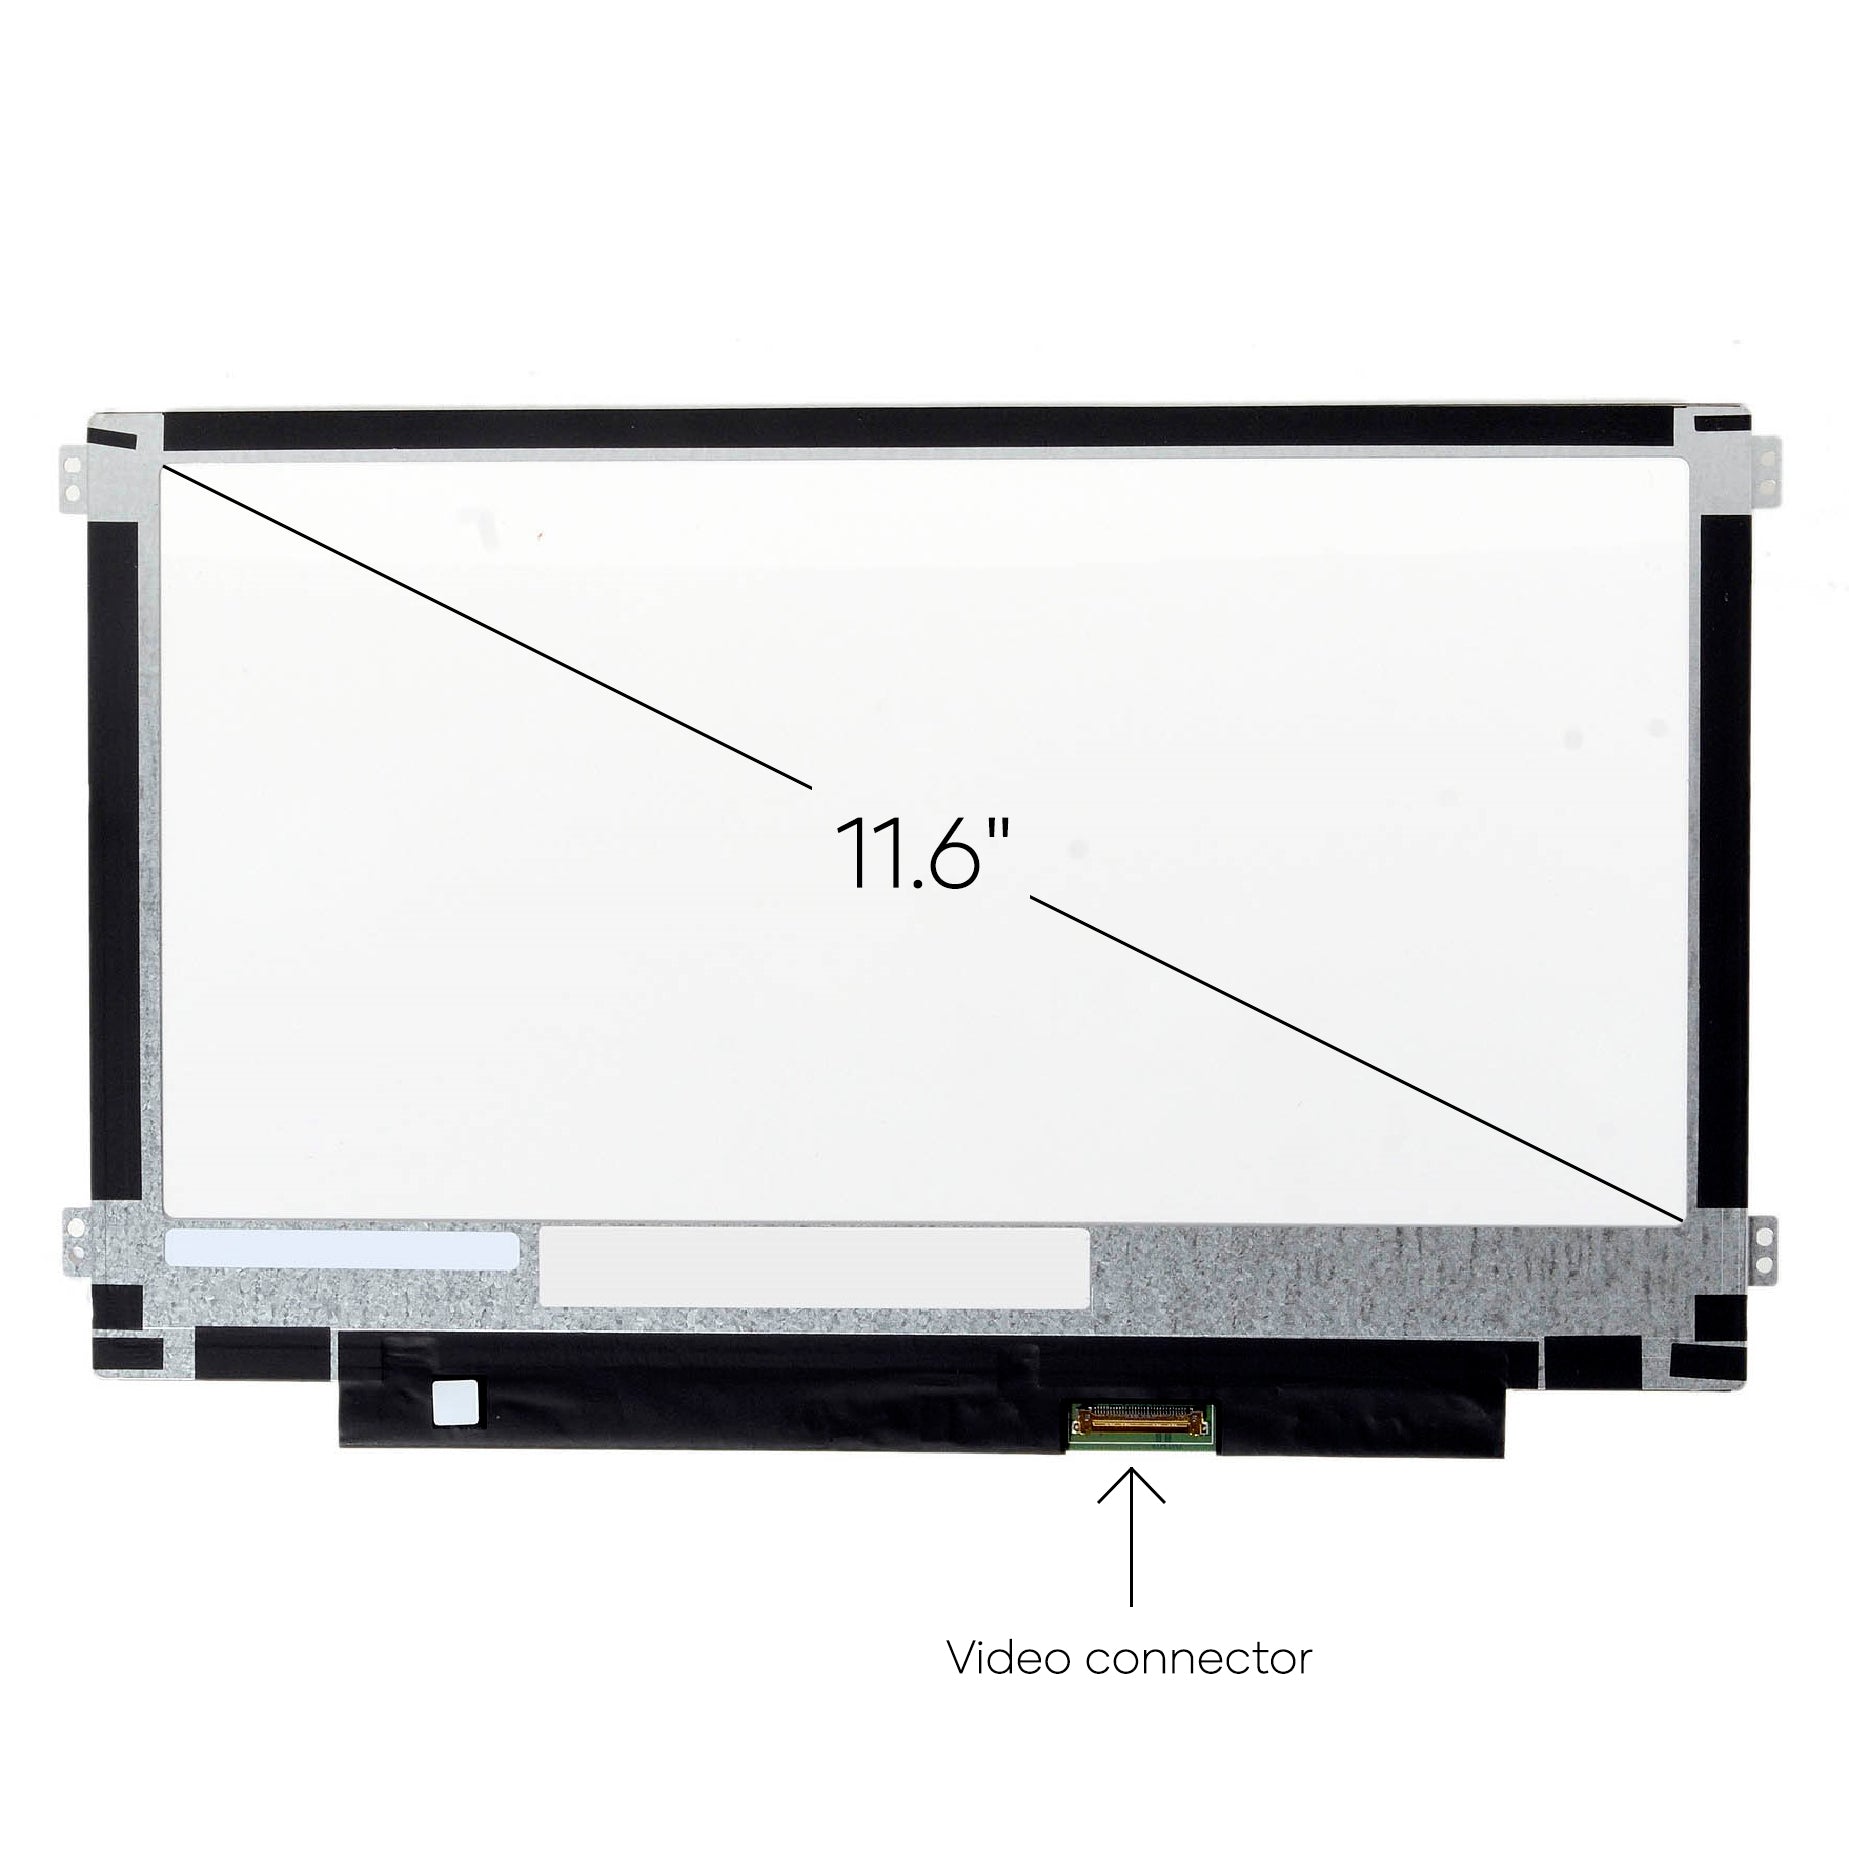 Screen Replacement for Acer Chromebook CB3-111-C4HT HD 1366x768 Matte LCD LED Display